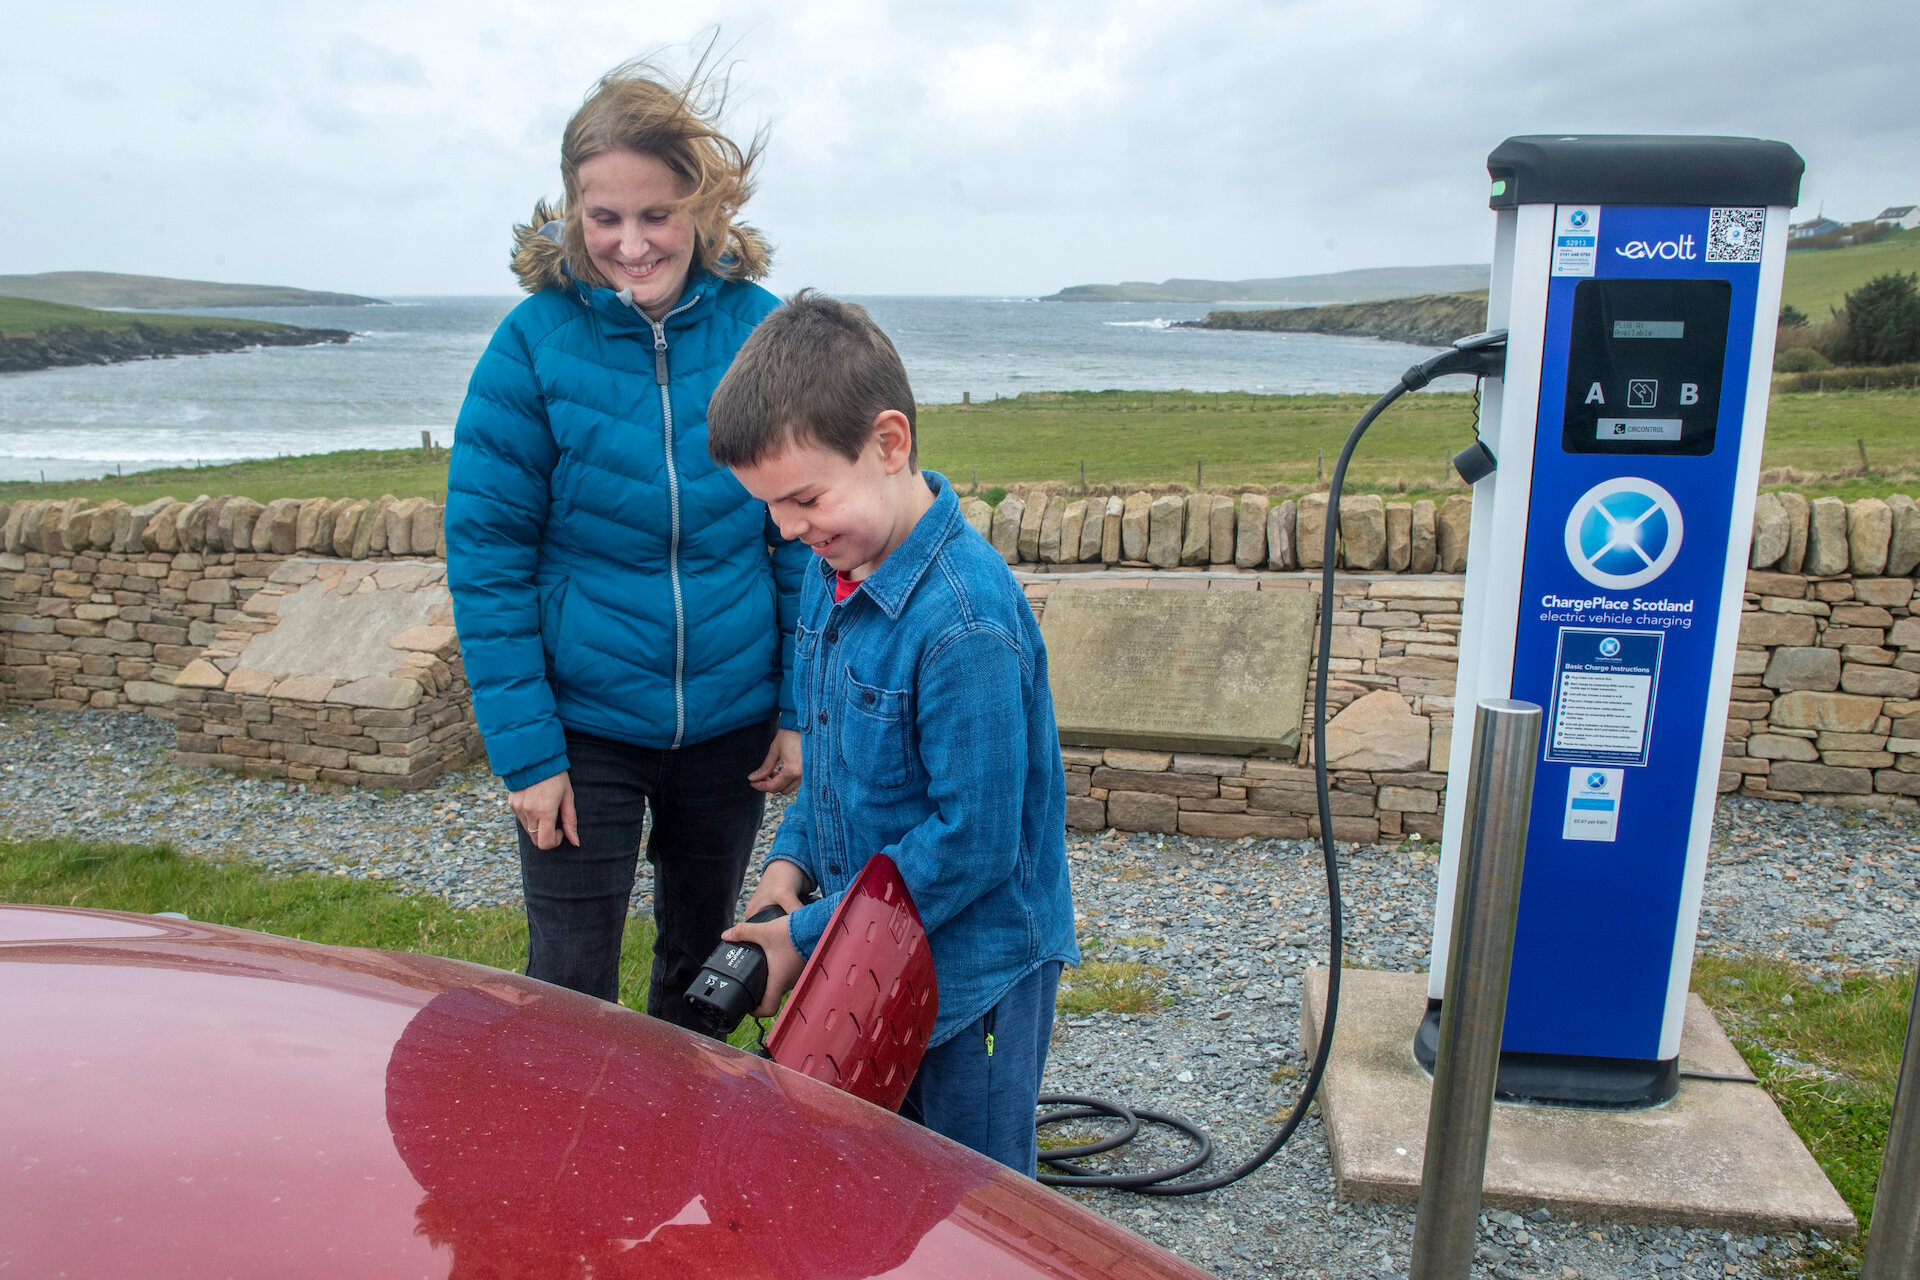 There are at least 26 public e-vehicle charging points across Shetland.